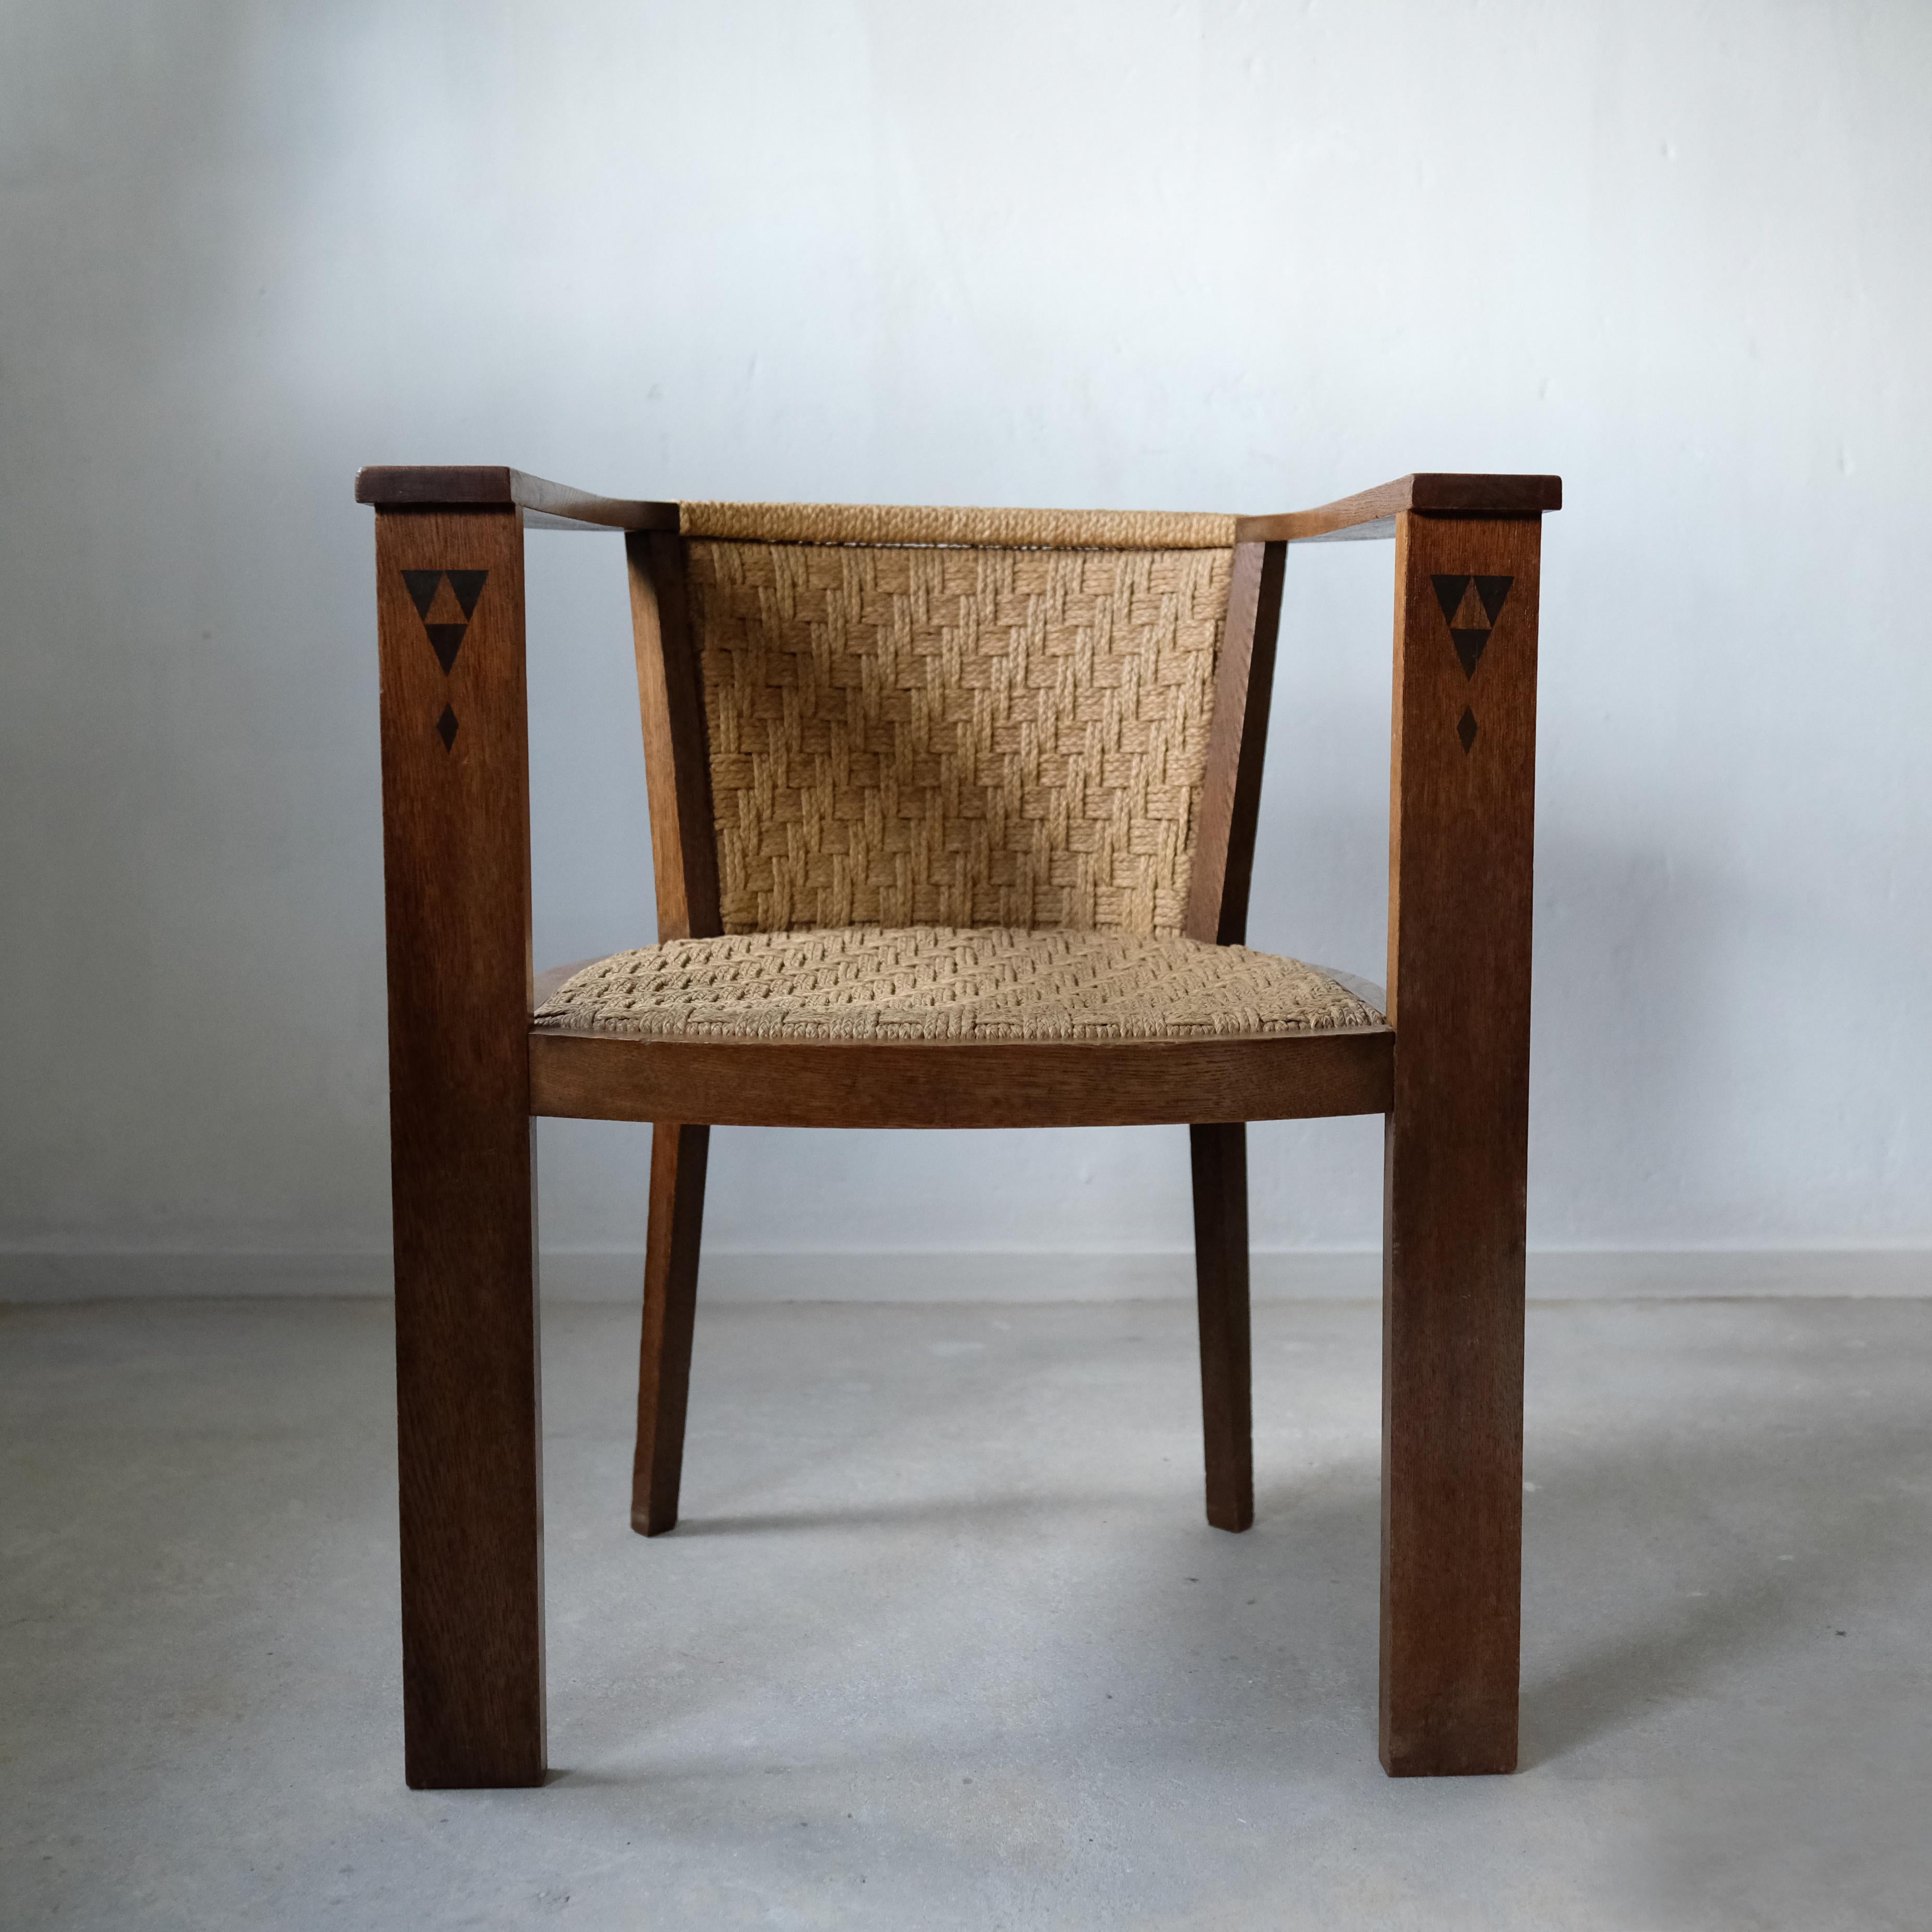 Amsterdamse school side chair, the Netherlands, 1920s.